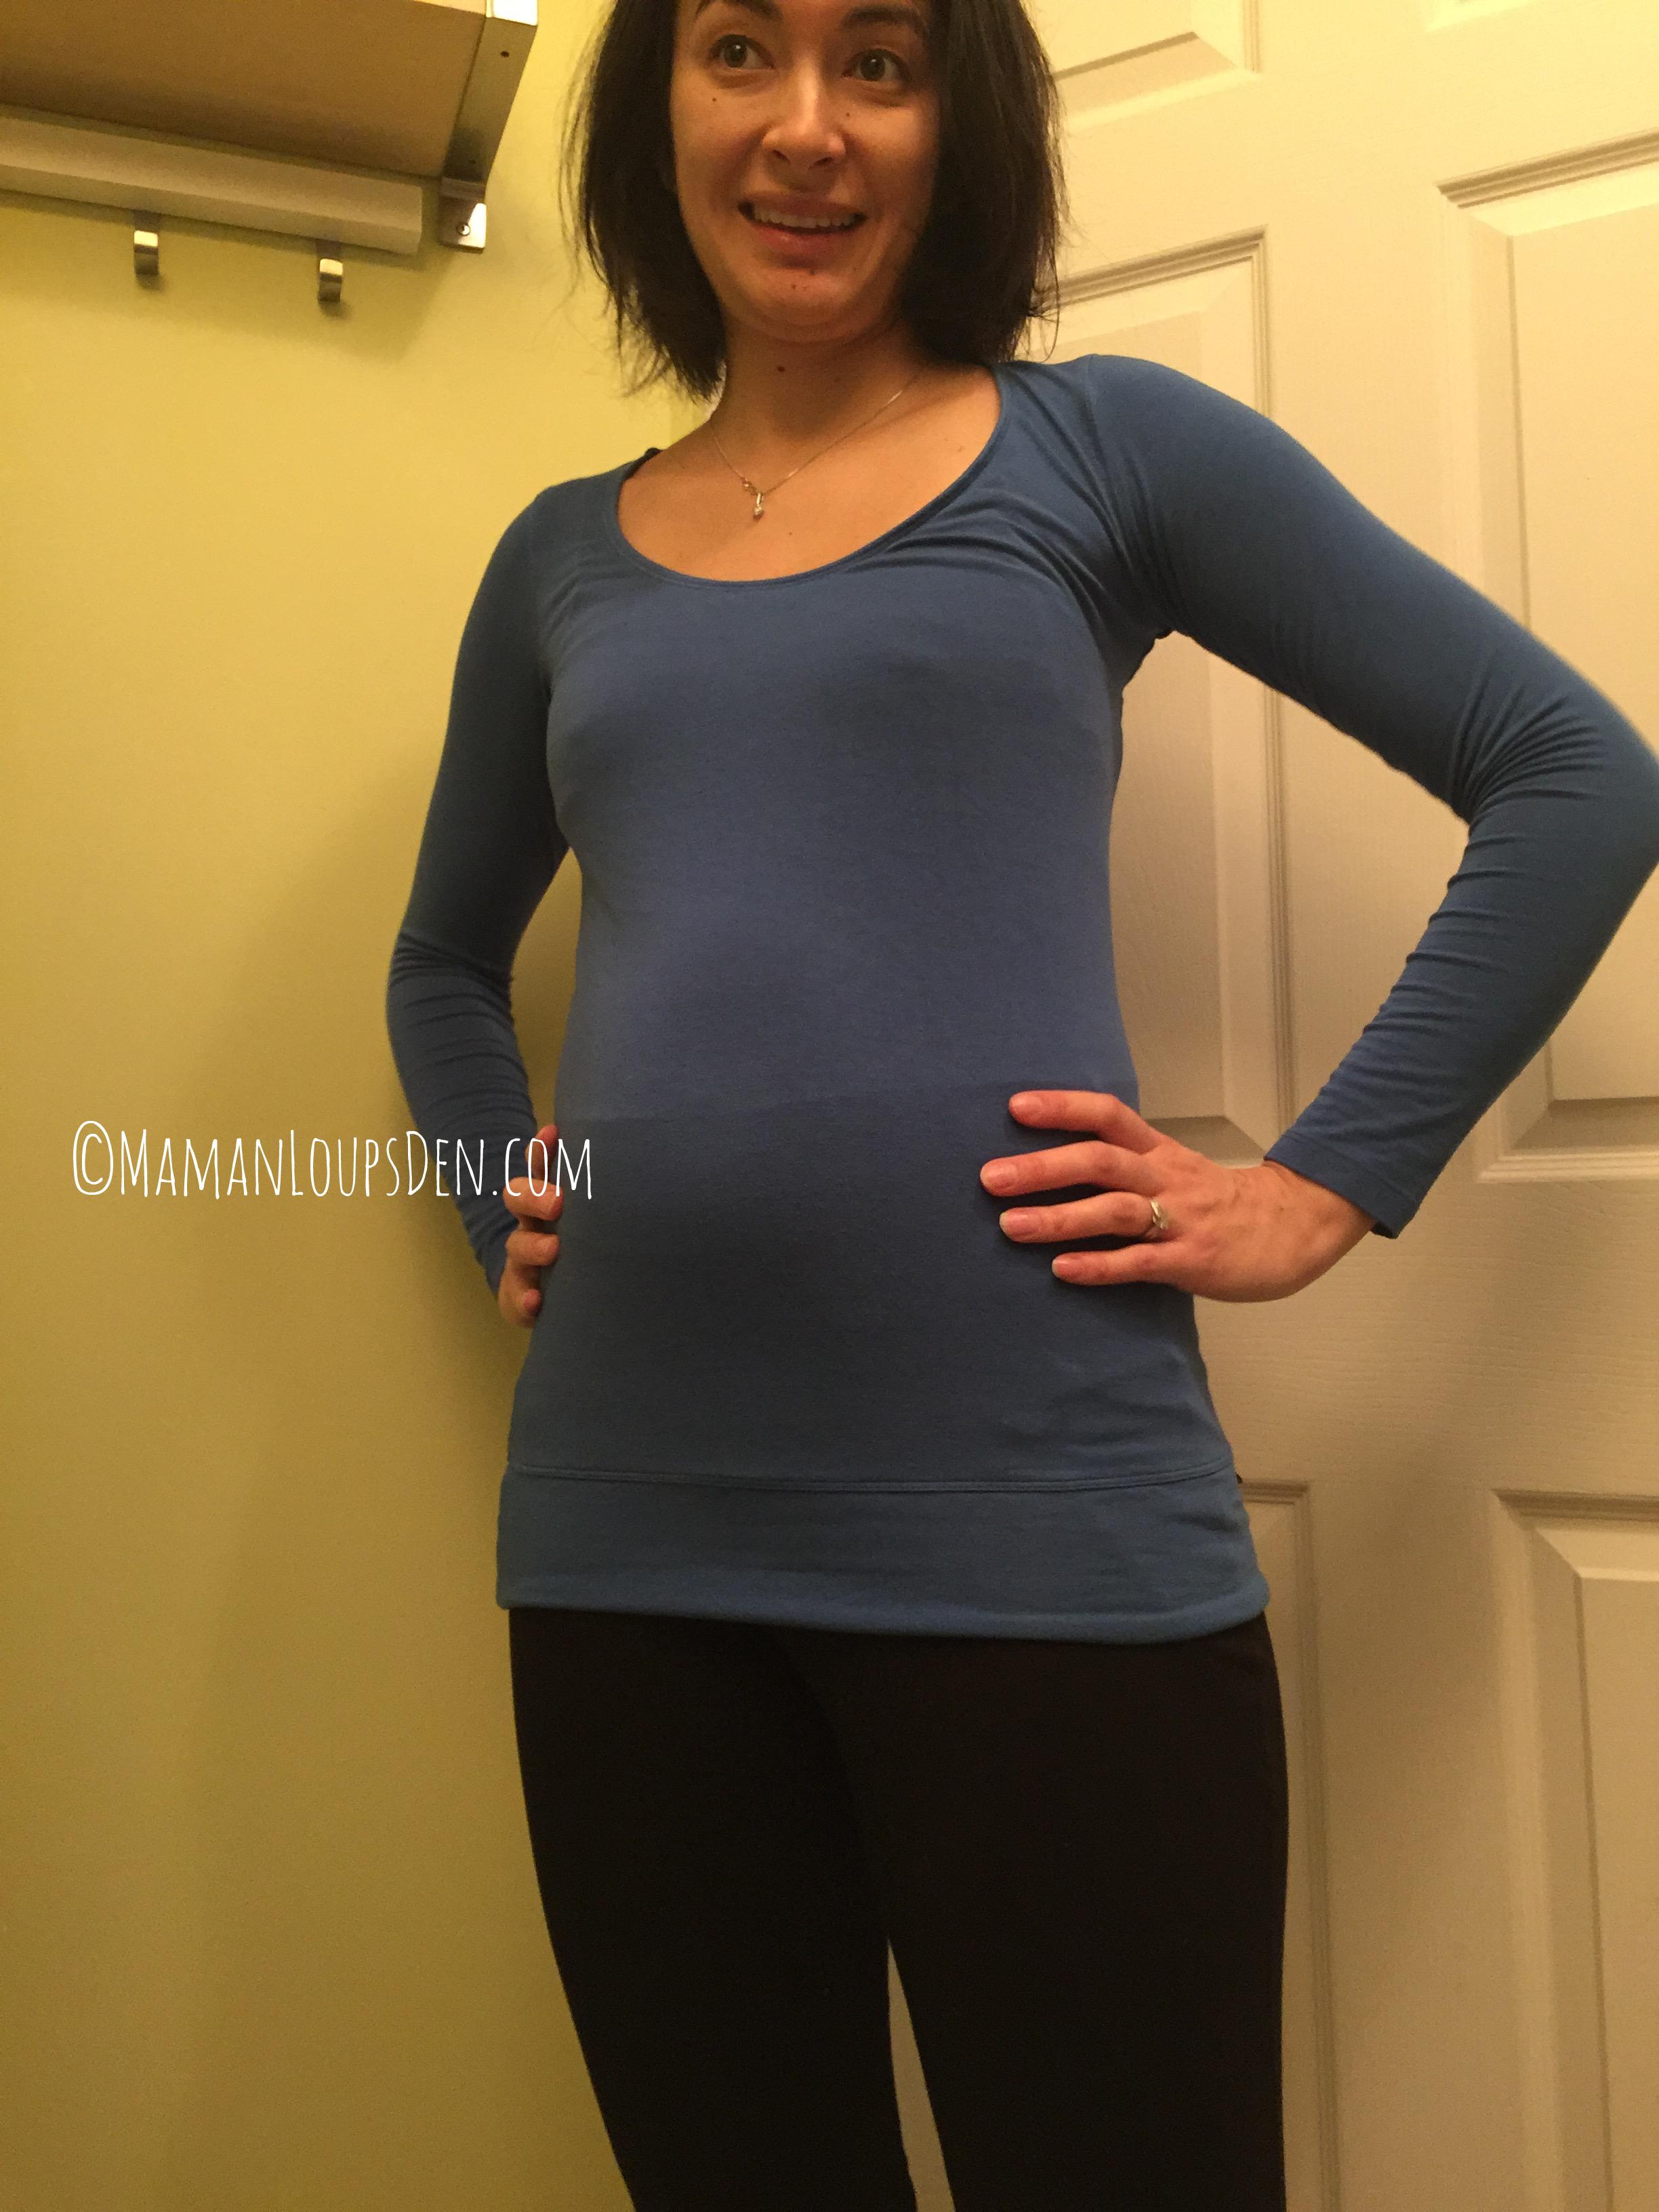 13 Weeks Pregnant: Back to Class